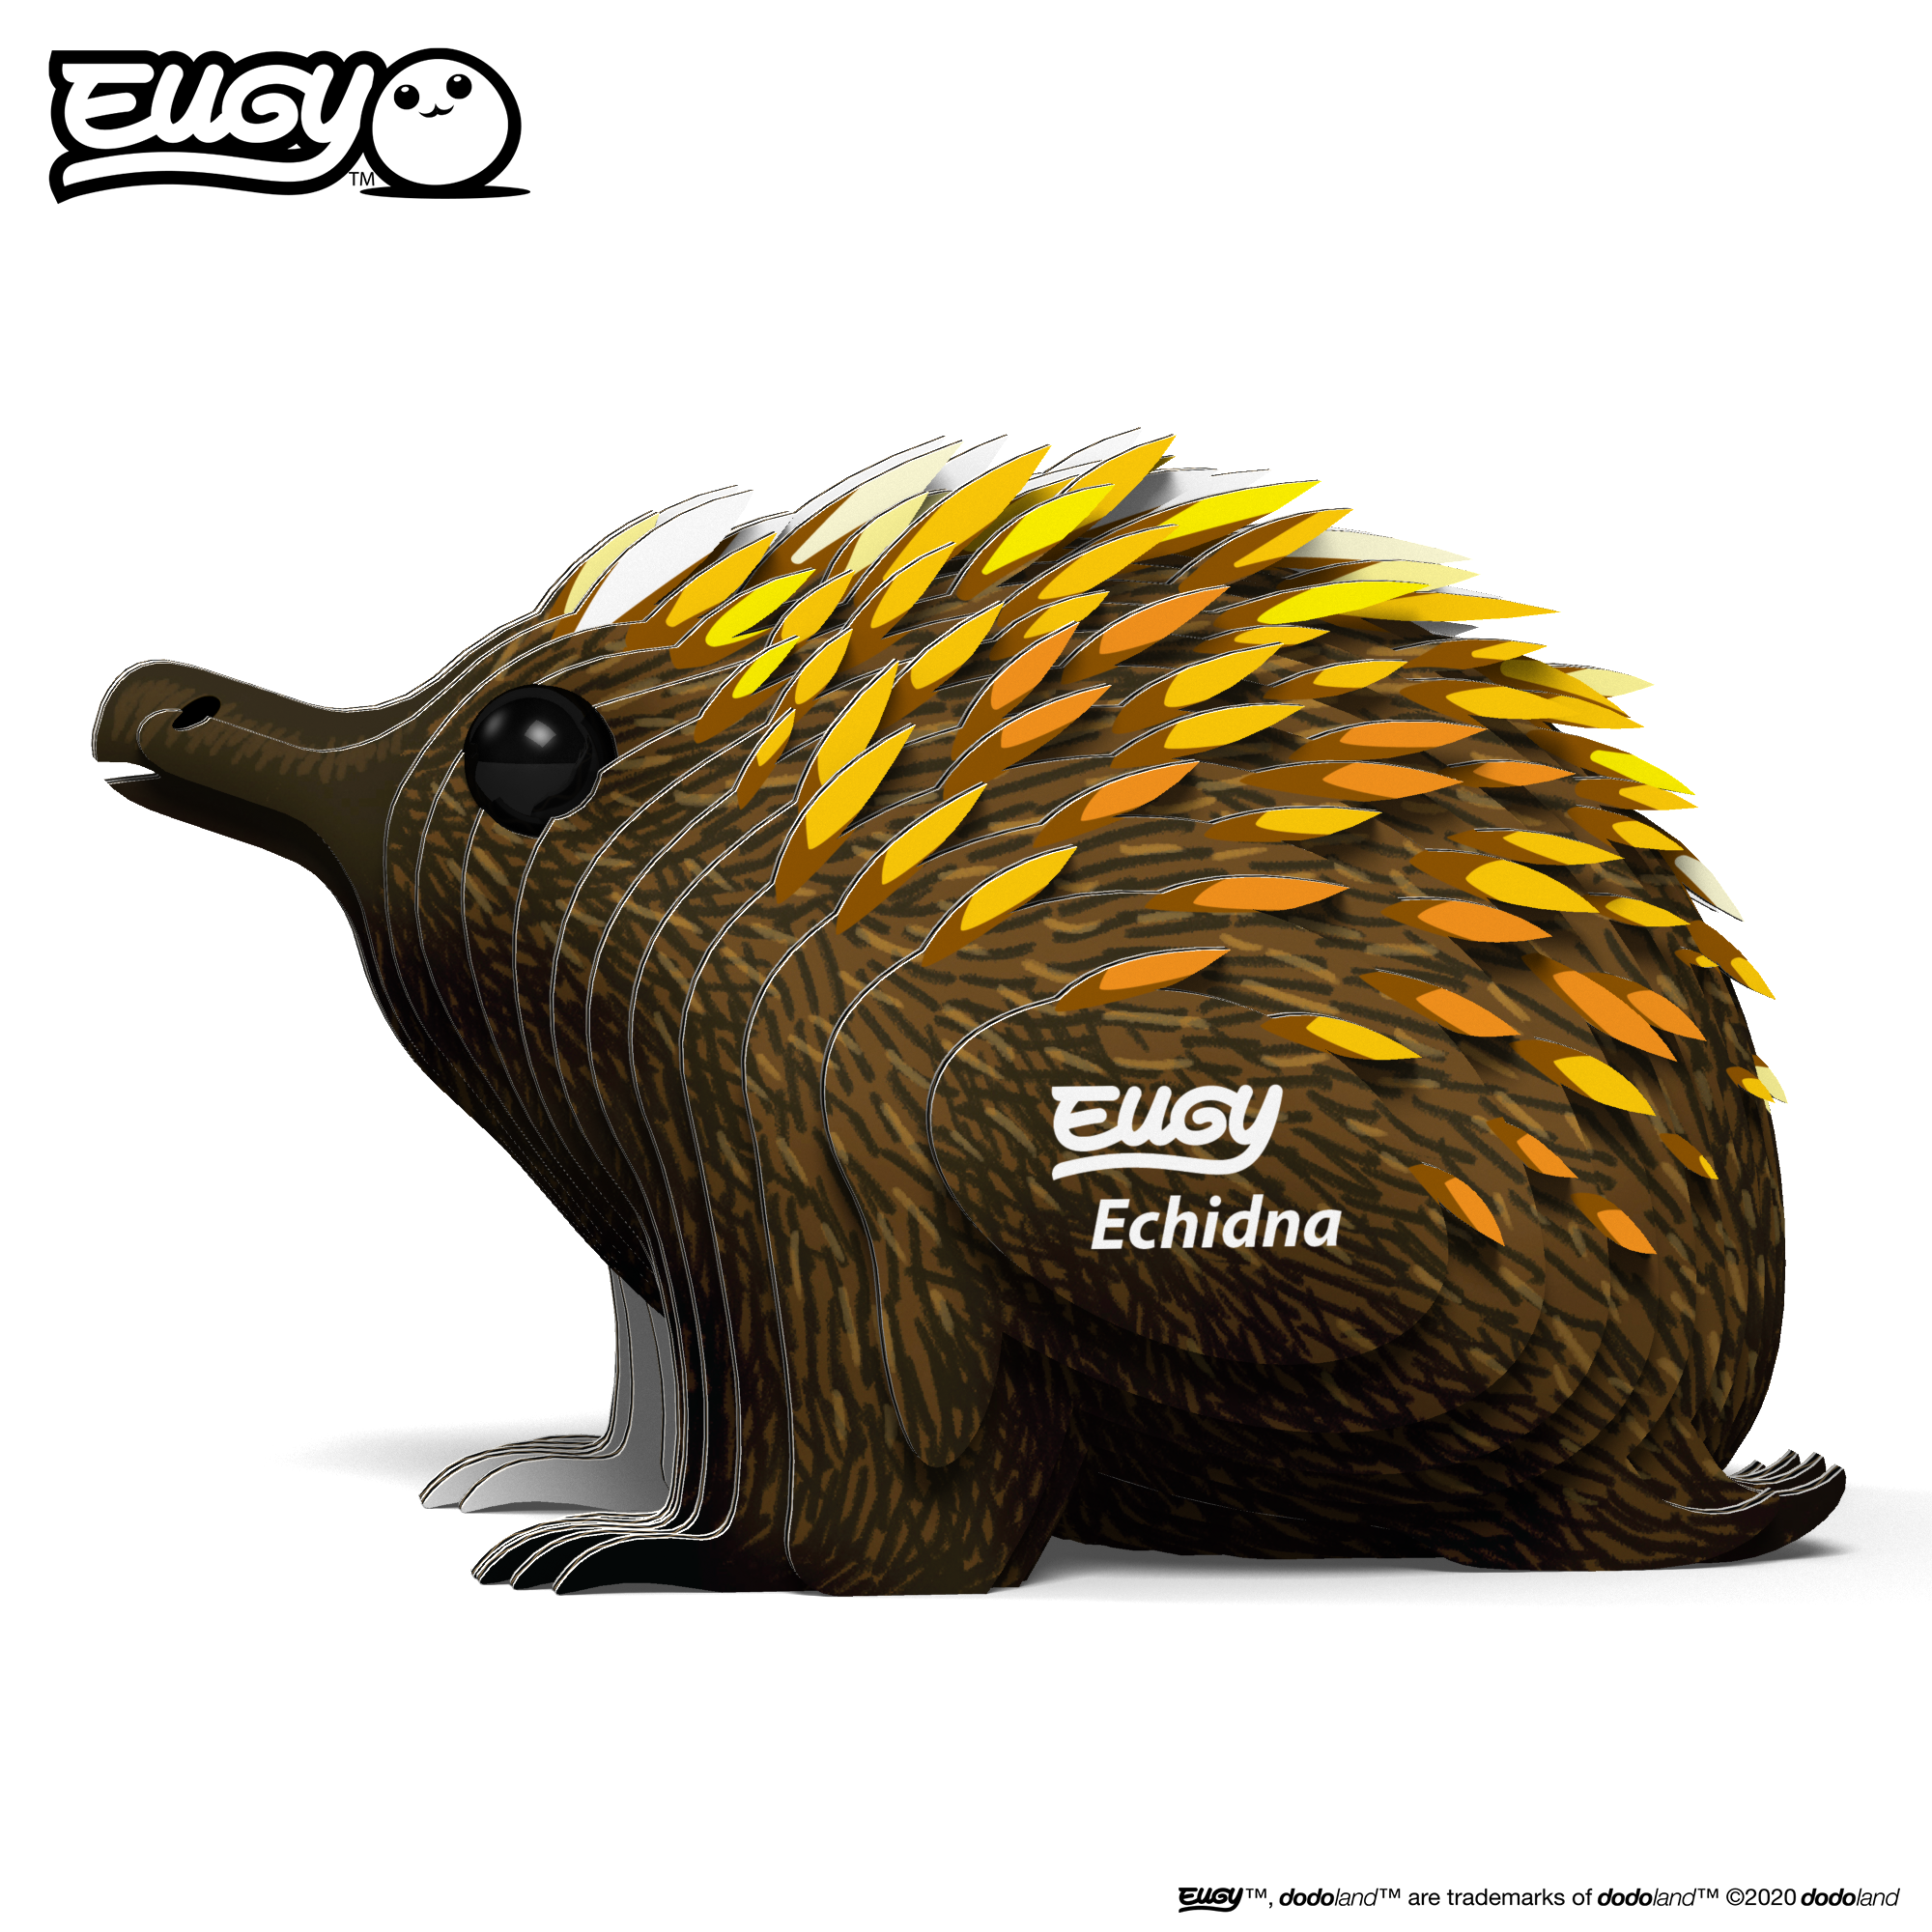 Image of an EUGY Echidna, facing left but viewed side on against a white background